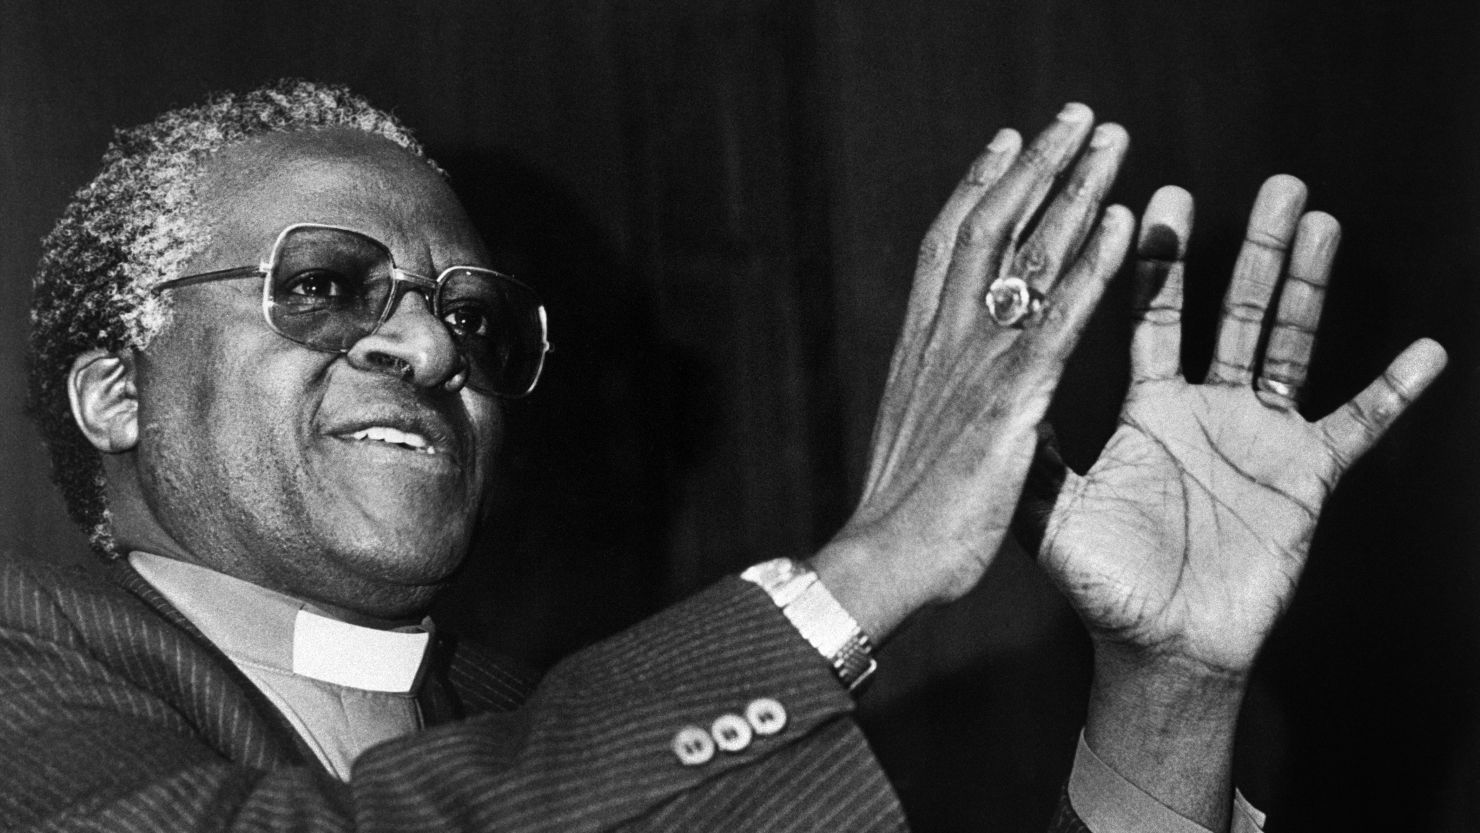 Desmond Tutu became an icon in South Africa for his role in ending apartheid.